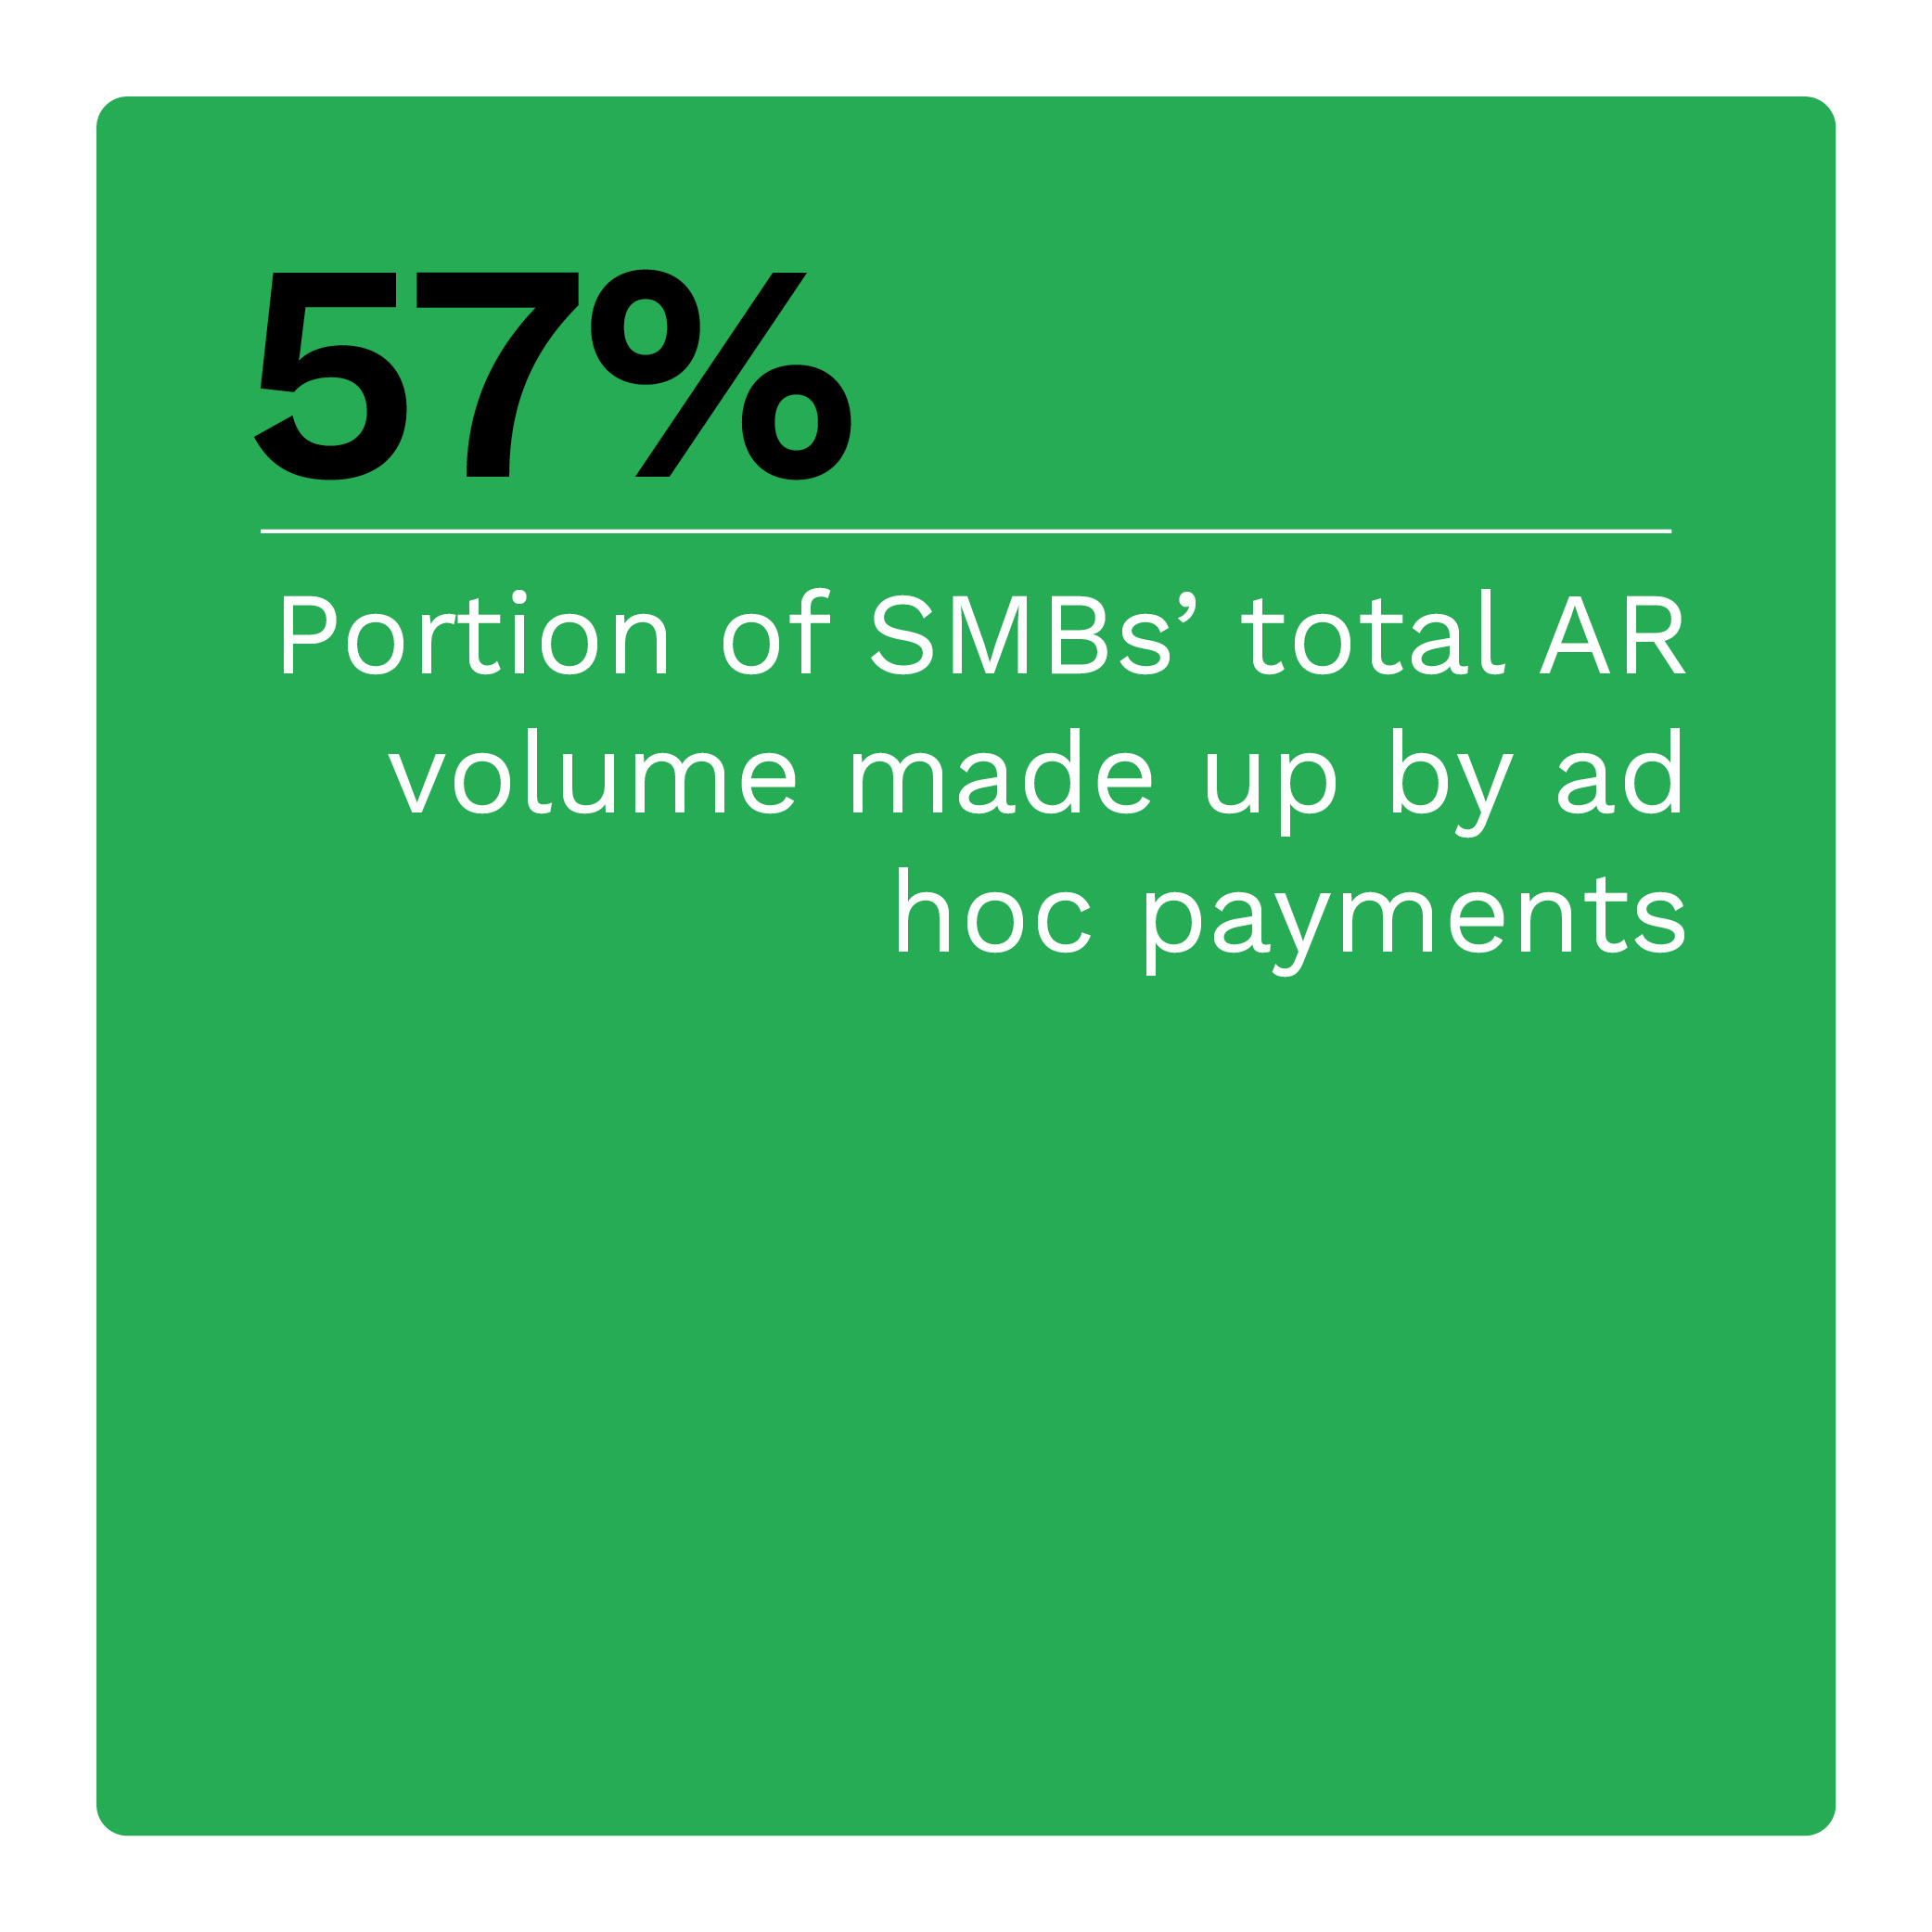  Portion of SMBs’ total AR volume made up by ad hoc payments